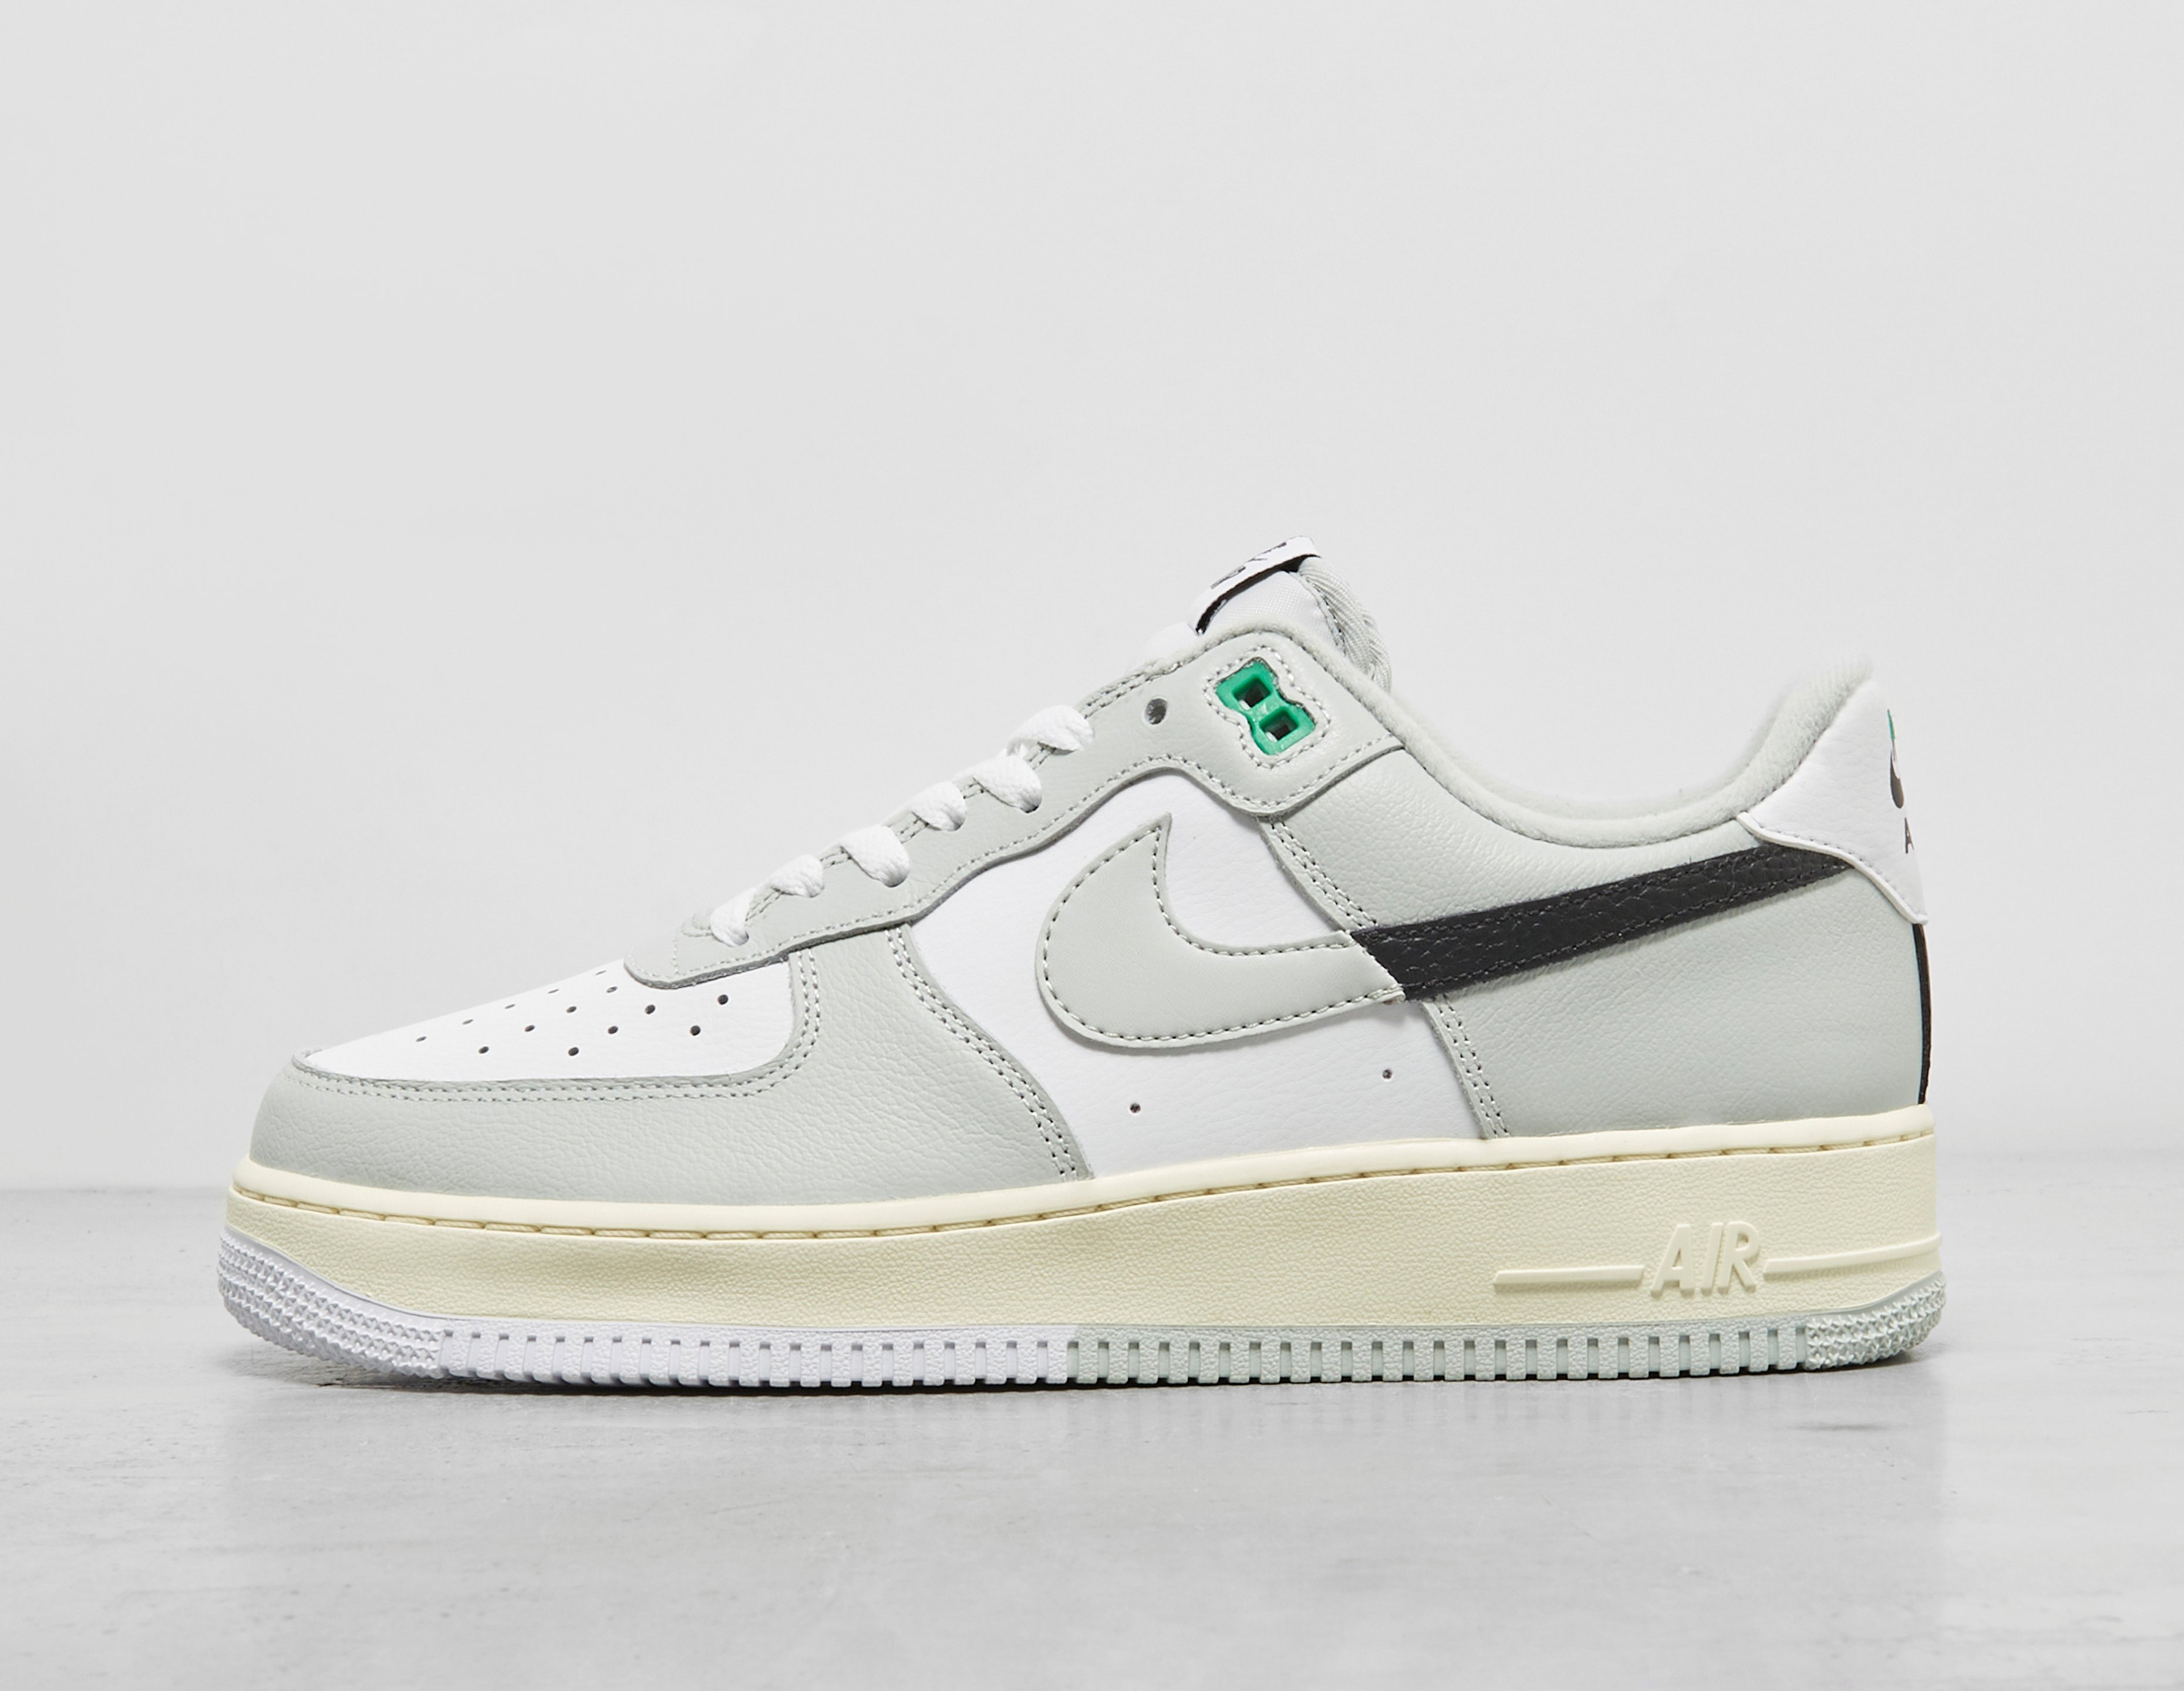 Toddler Size Nike Air Force 1 Low LV8 'Double Layer - Light Aqua